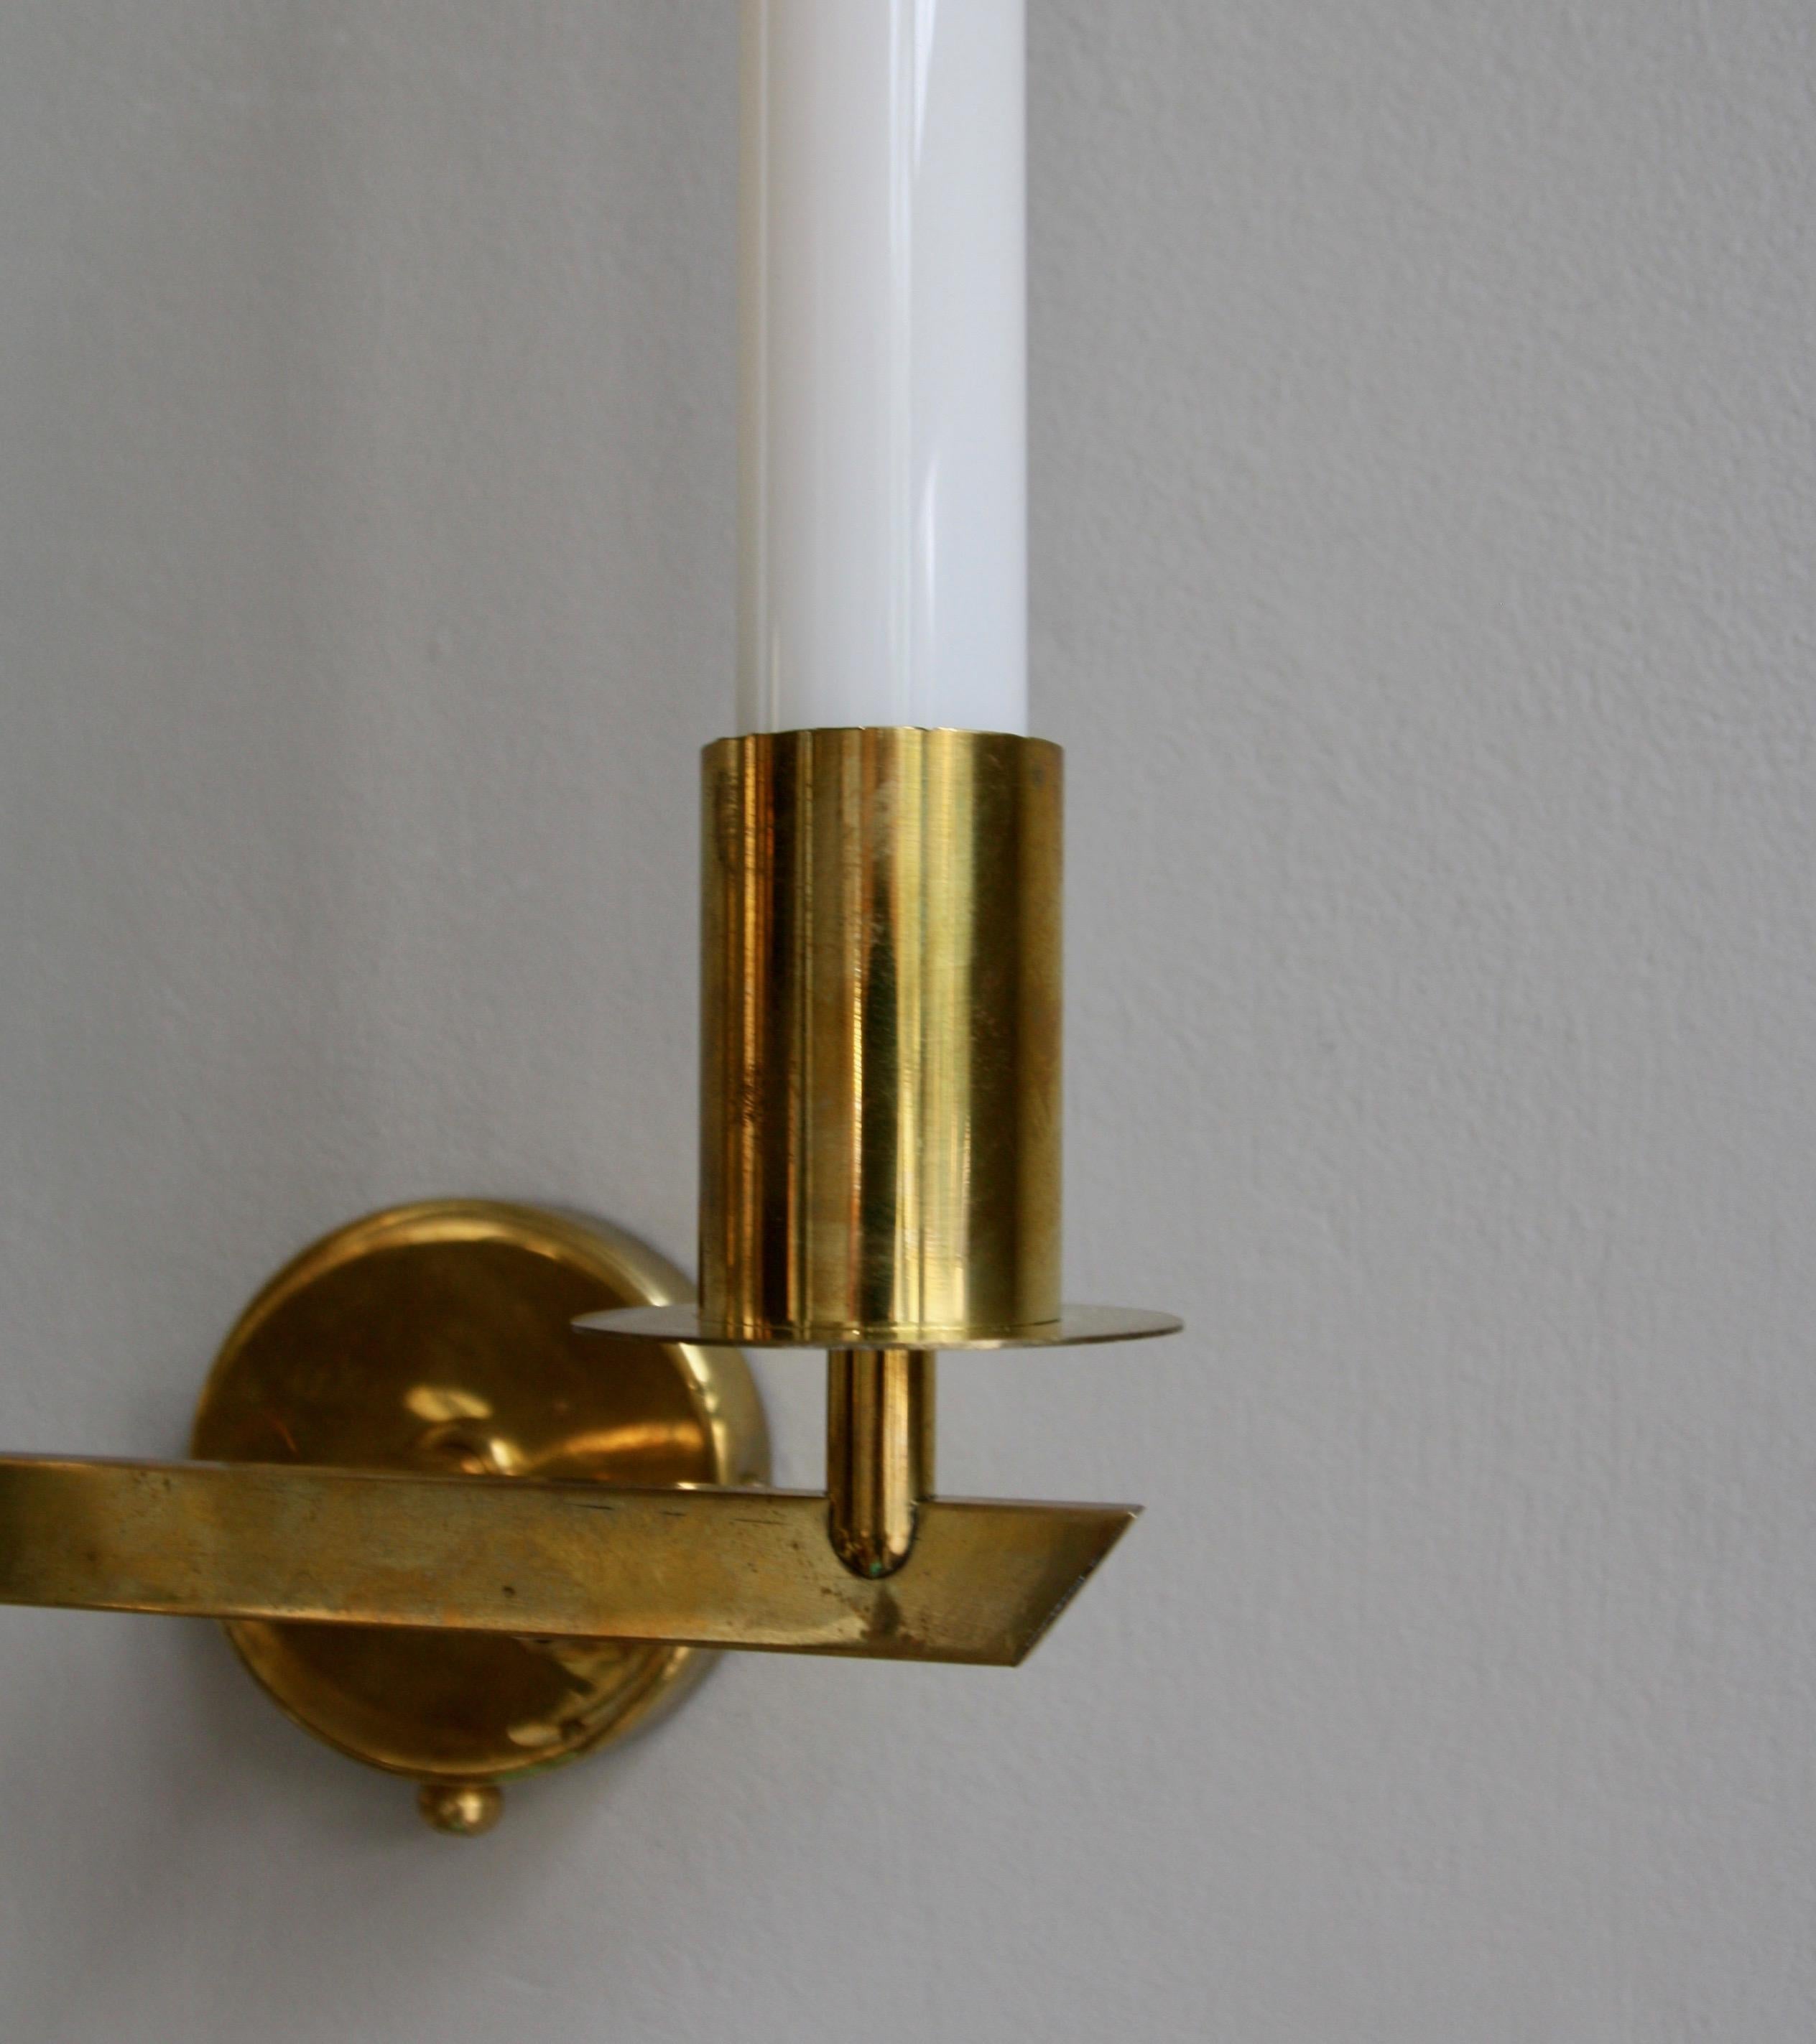 Pair of Wall Sconces in Brass Designed and Made by Itsu Oy, Finland, circa 1950 For Sale 1